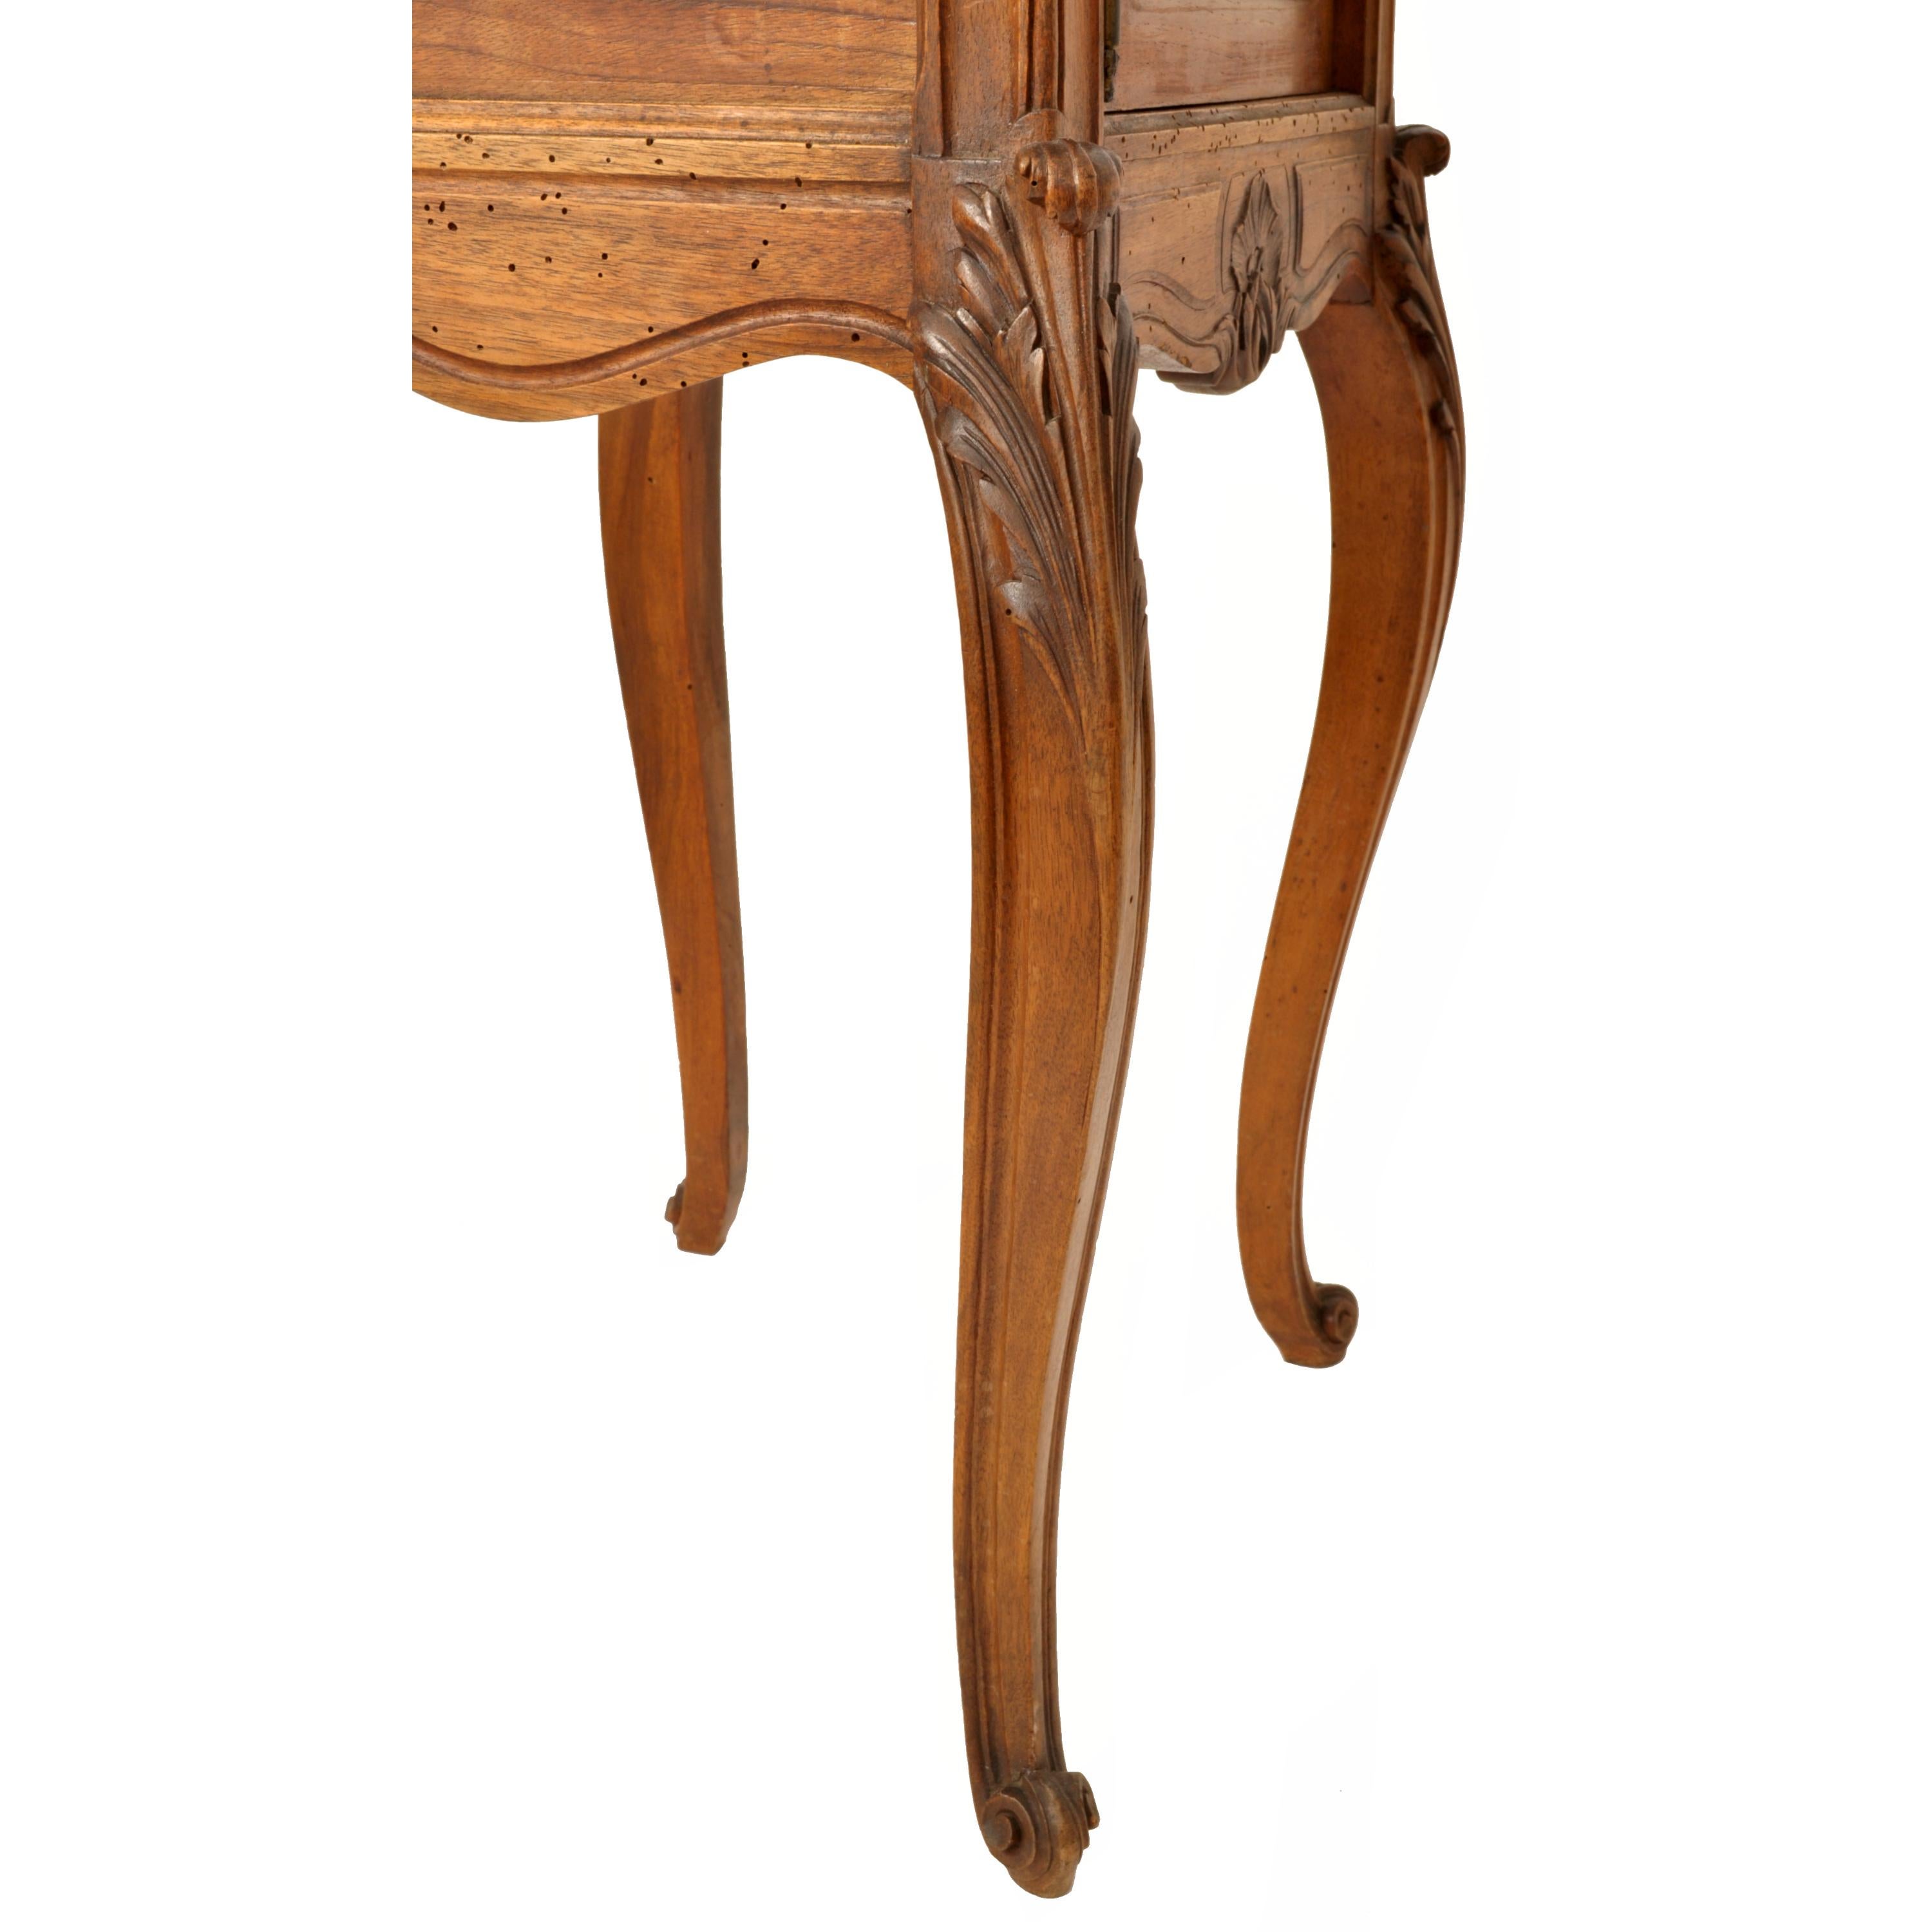 Antique French Provincial Louis XVI Carved Walnut & Marble Nightstand Table 1880 For Sale 8